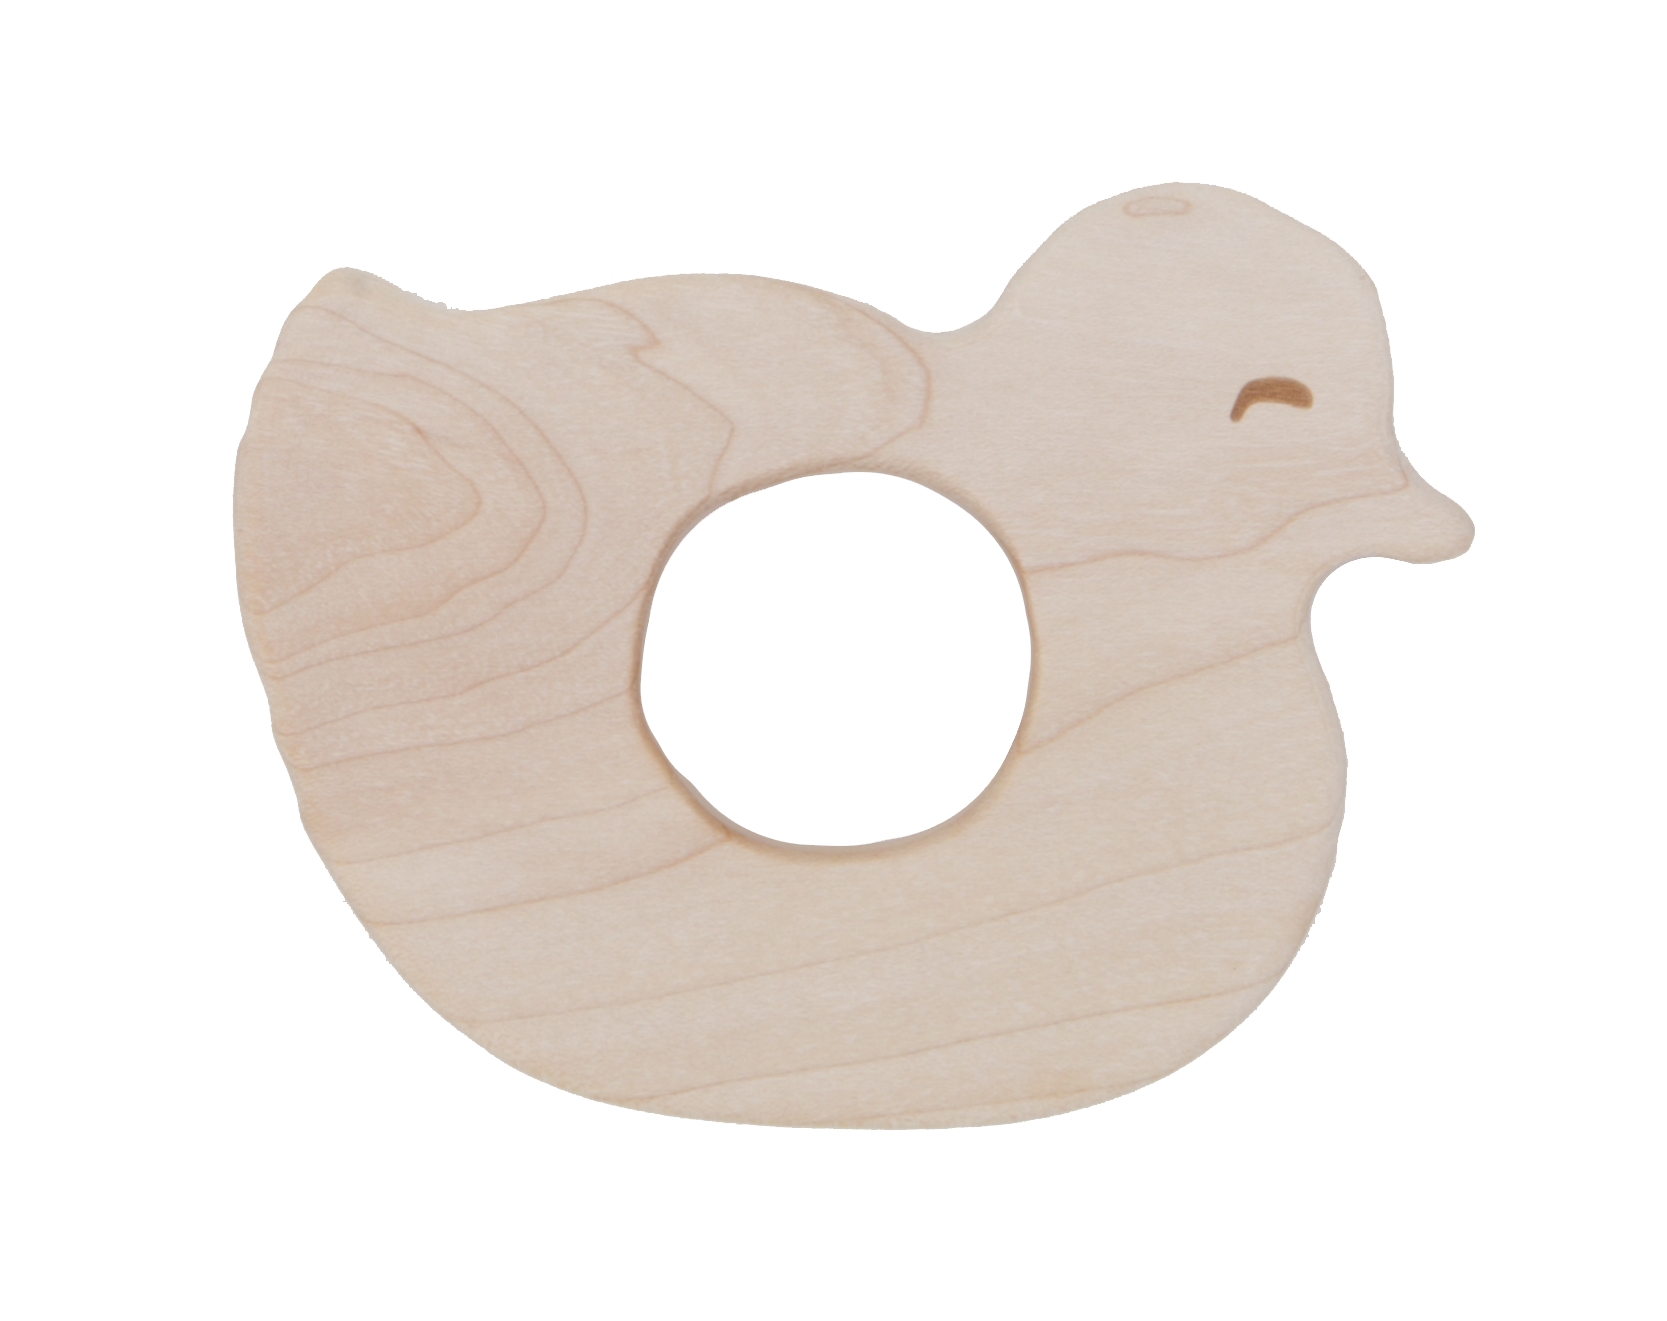 Wooden Story Teether - Baby Duck,Wooden Story Teether - Baby Duck